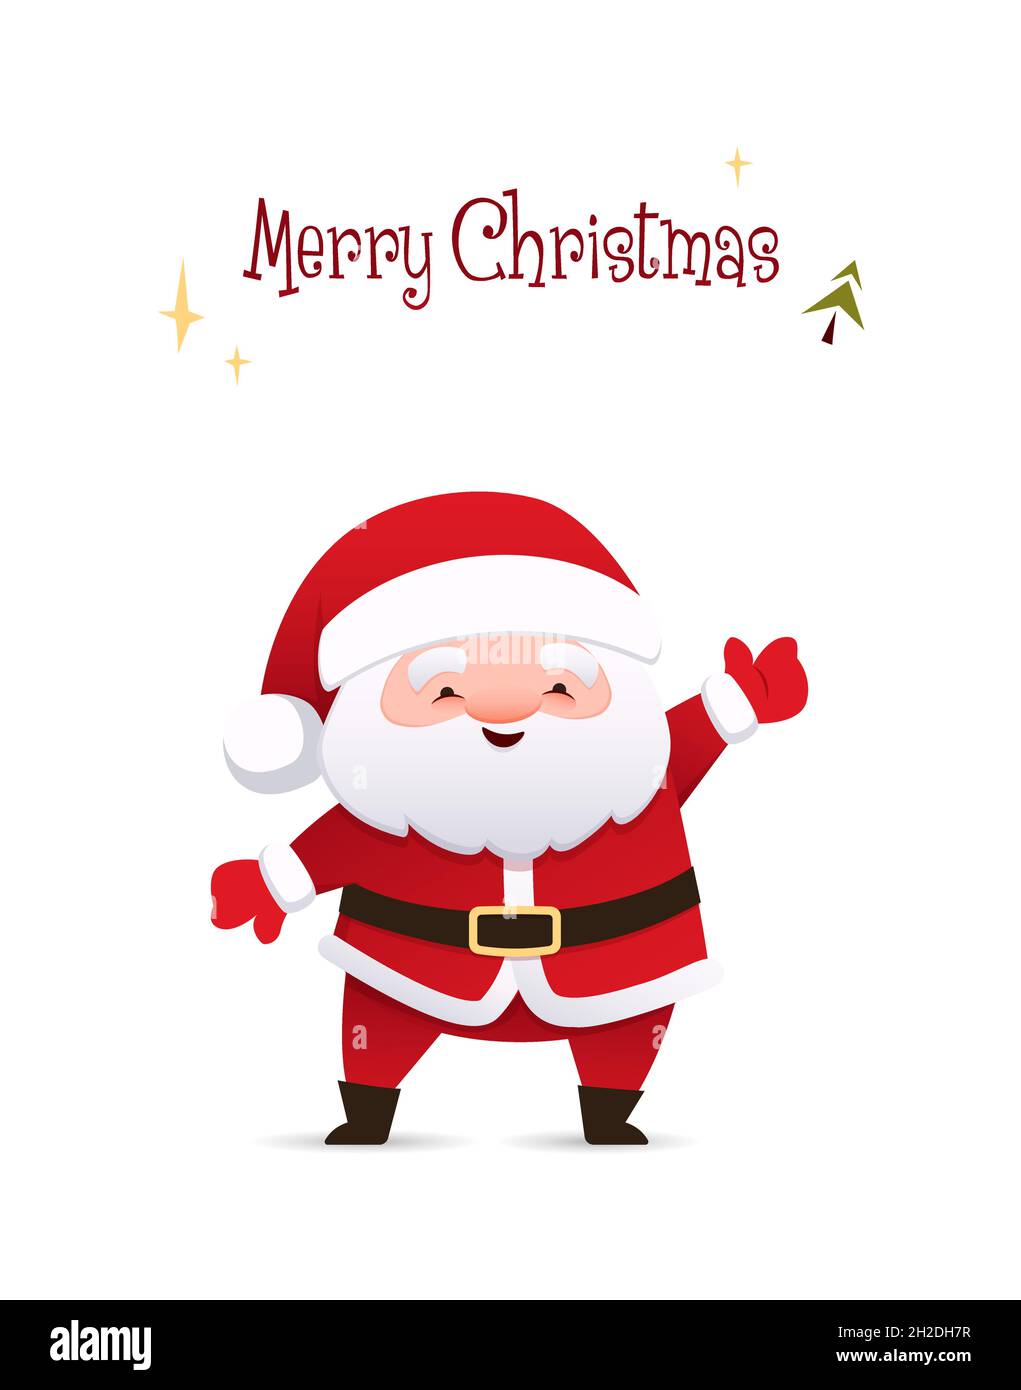 Merry Christmas greeting card with Santa Claus in a red camisole and a hat. Vector isolated illustration on white background Stock Vector